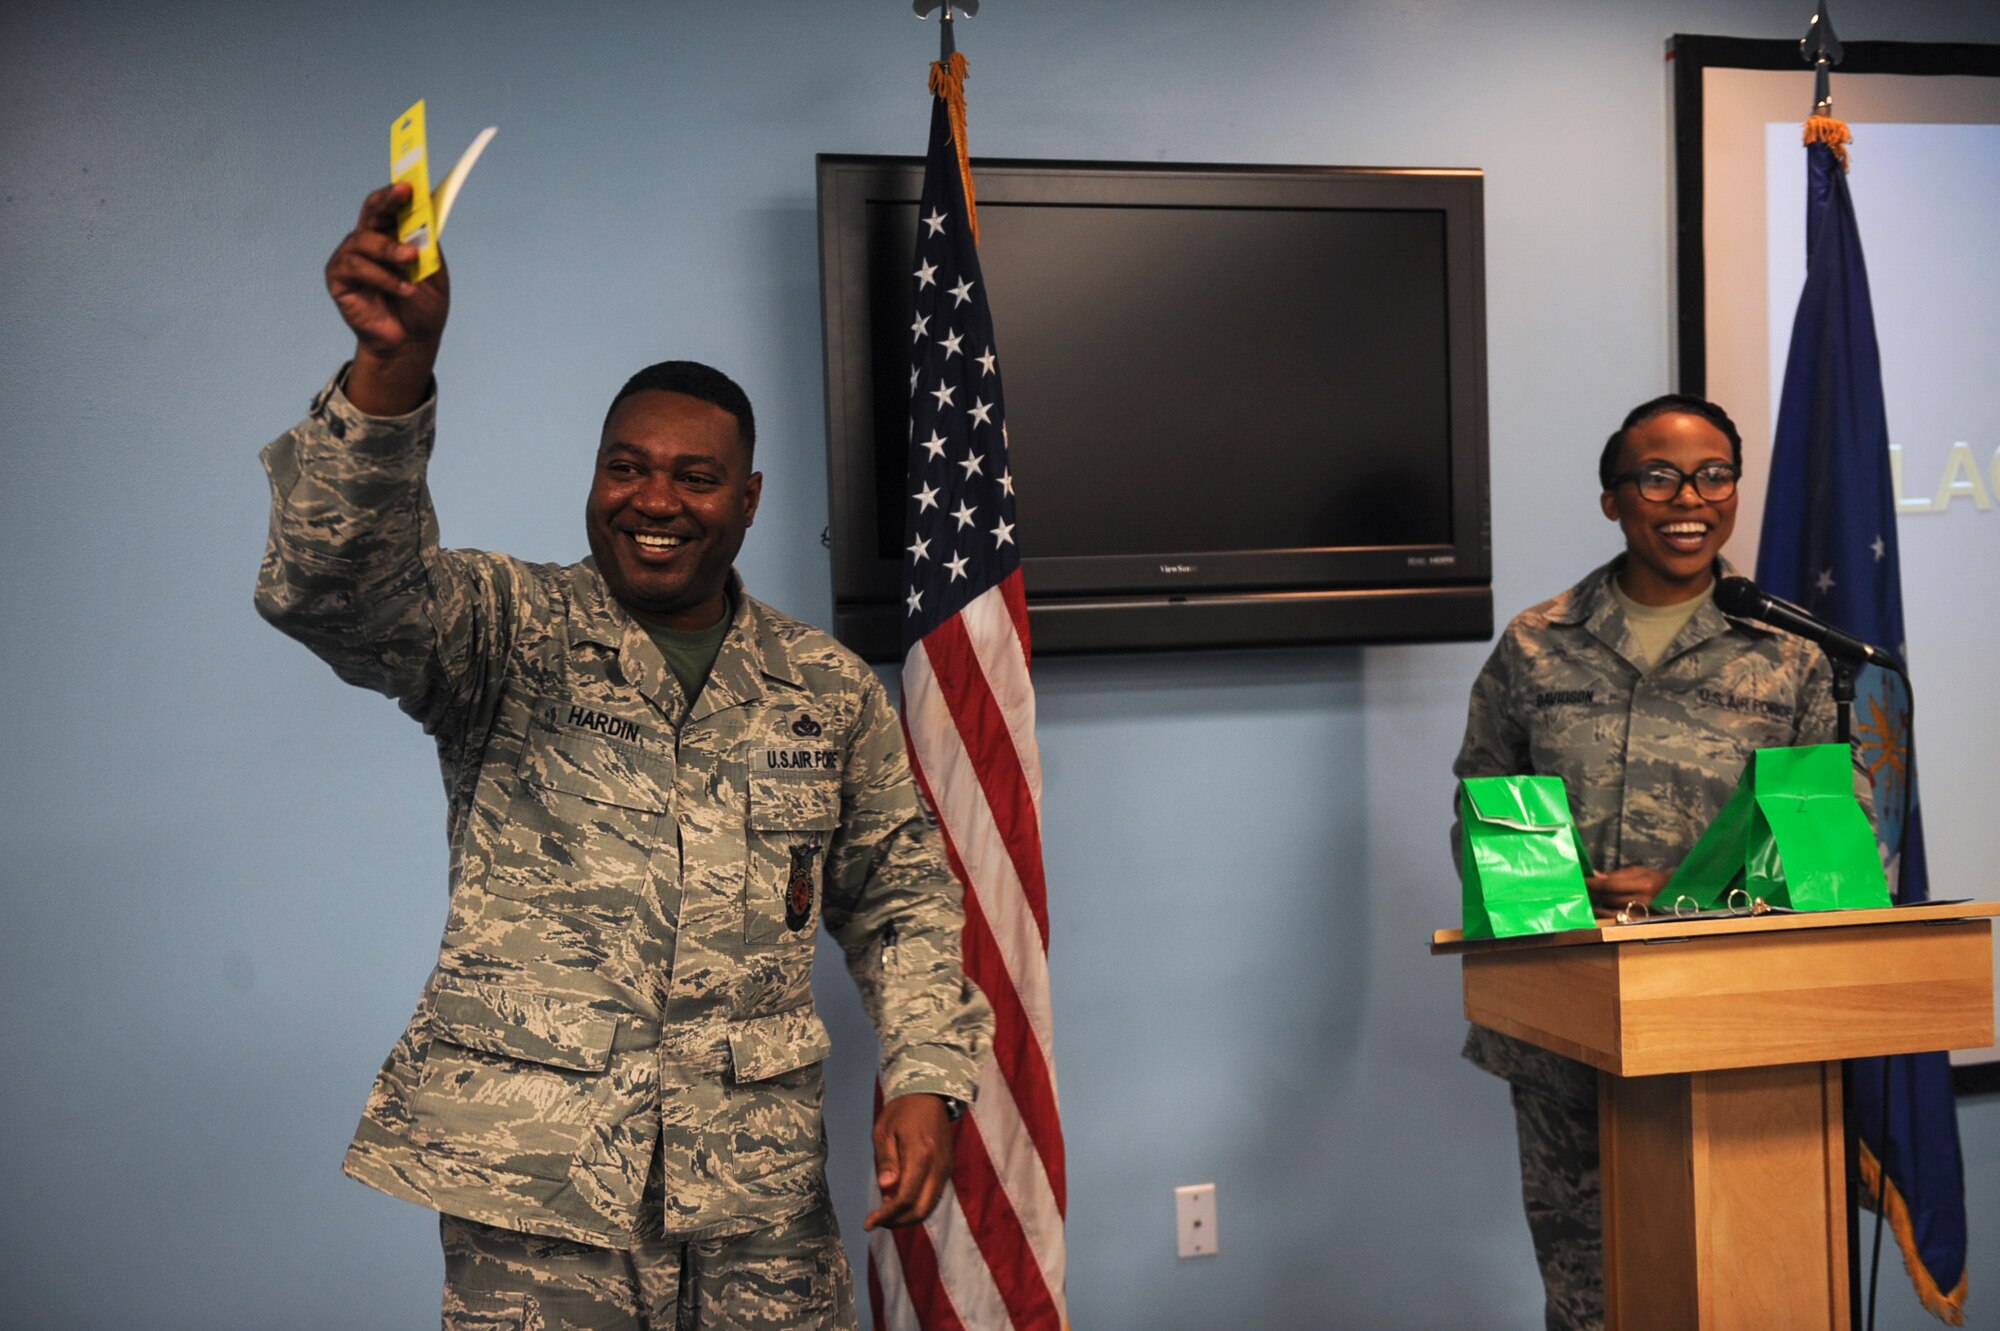 U.S. Air Force Chief Master Sgt. Will Hardin, 23d Civil Engineer Squadron fire prevention chief, celebrates after winning a door prize during the Black History Month luncheon Feb. 27, 2015, at Moody Air Force Base, Ga. Five random recipients won door prizes at the end of the luncheon. (U.S. Air Force photo by Senior Airman Olivia Bumpers/Released)